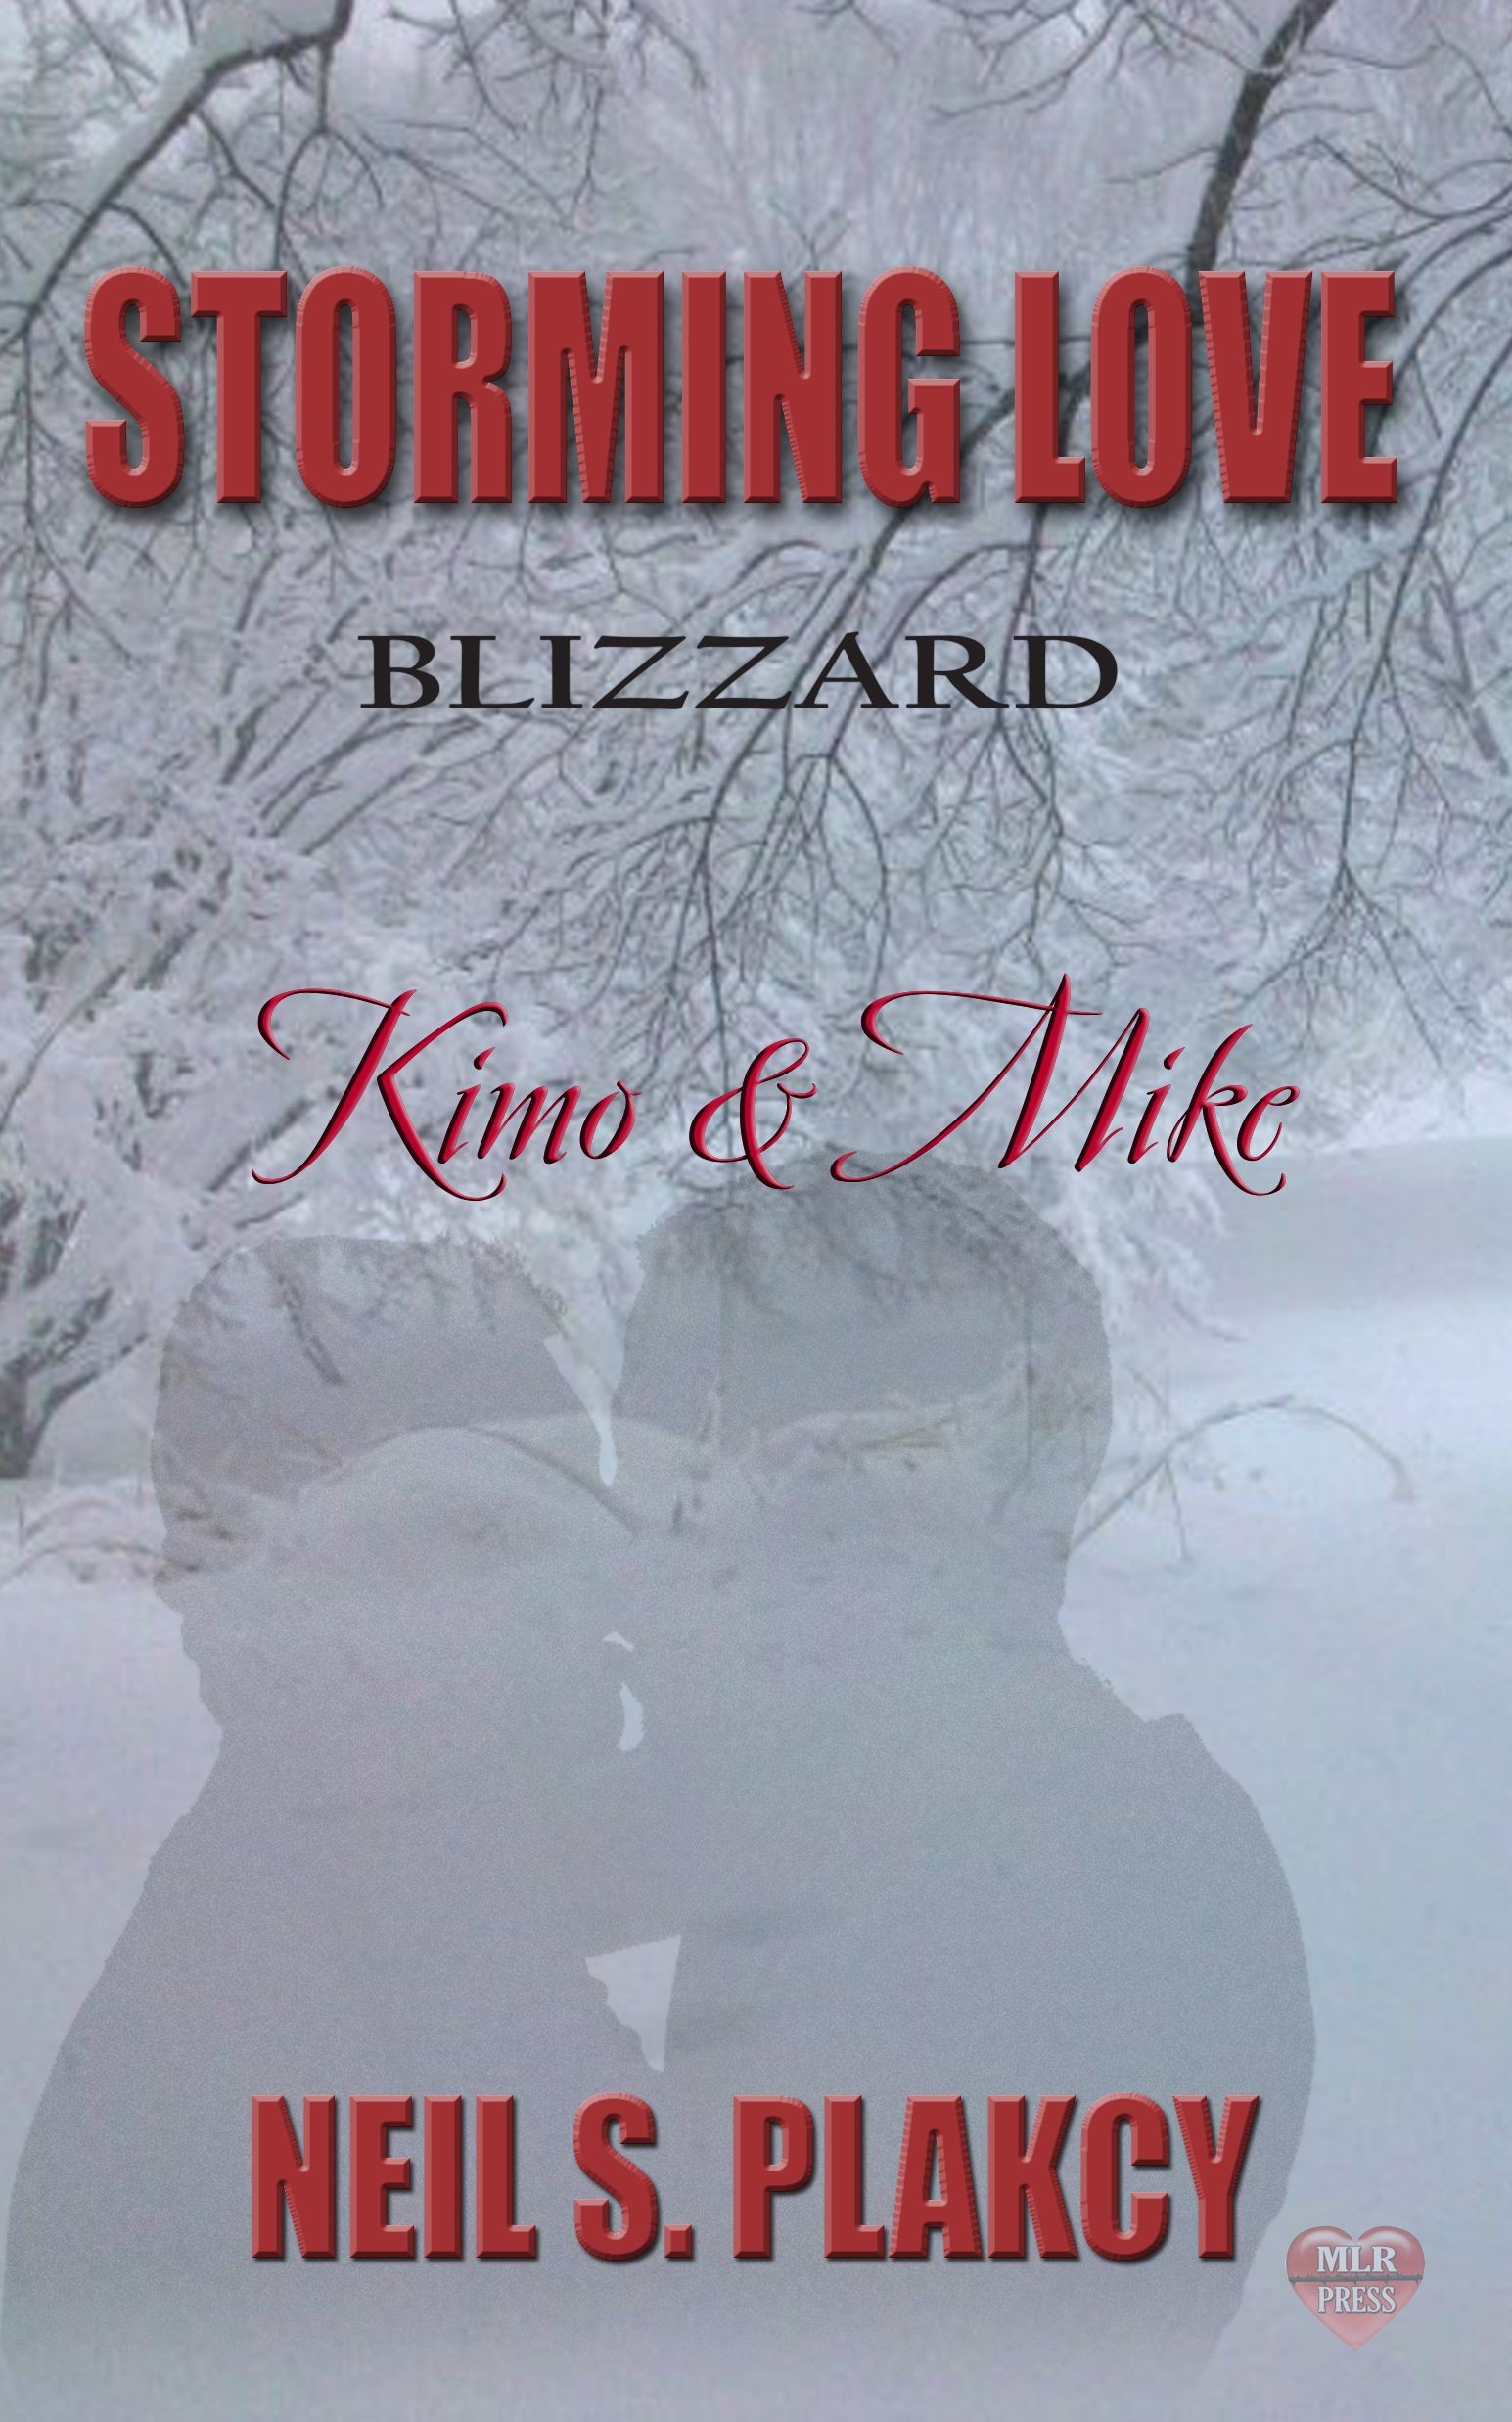 Storming Love Blizzard Kimo & Mike (2015) by Neil S. Plakcy